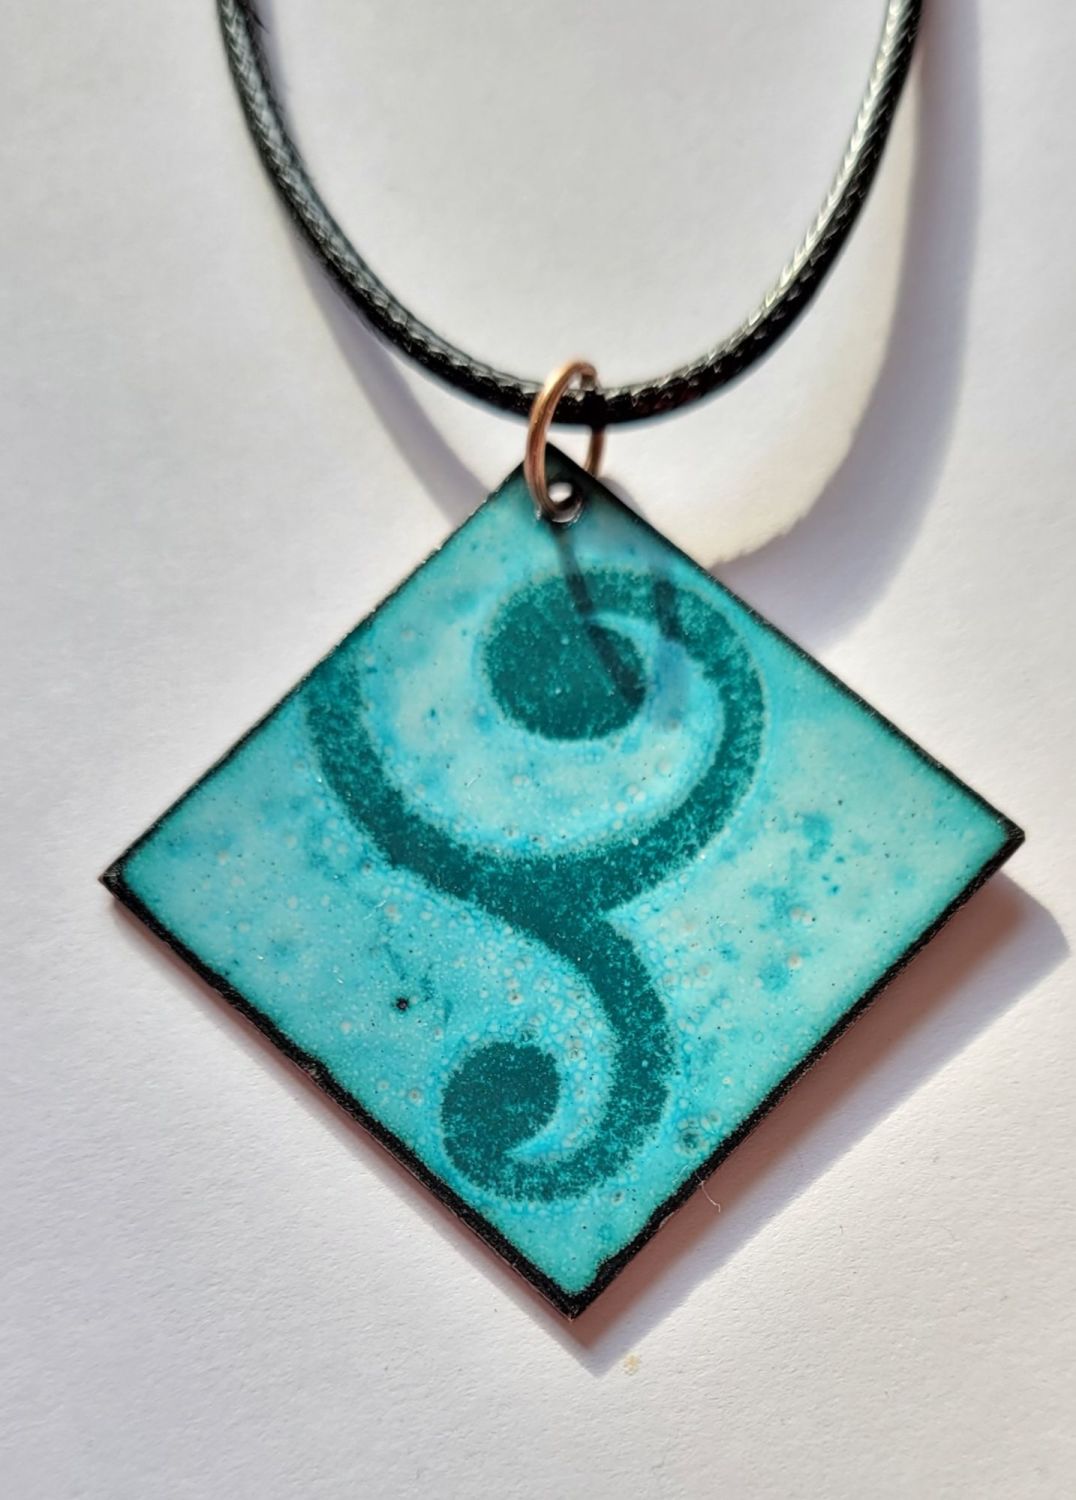 Pale teal with a jade green swirl necklace